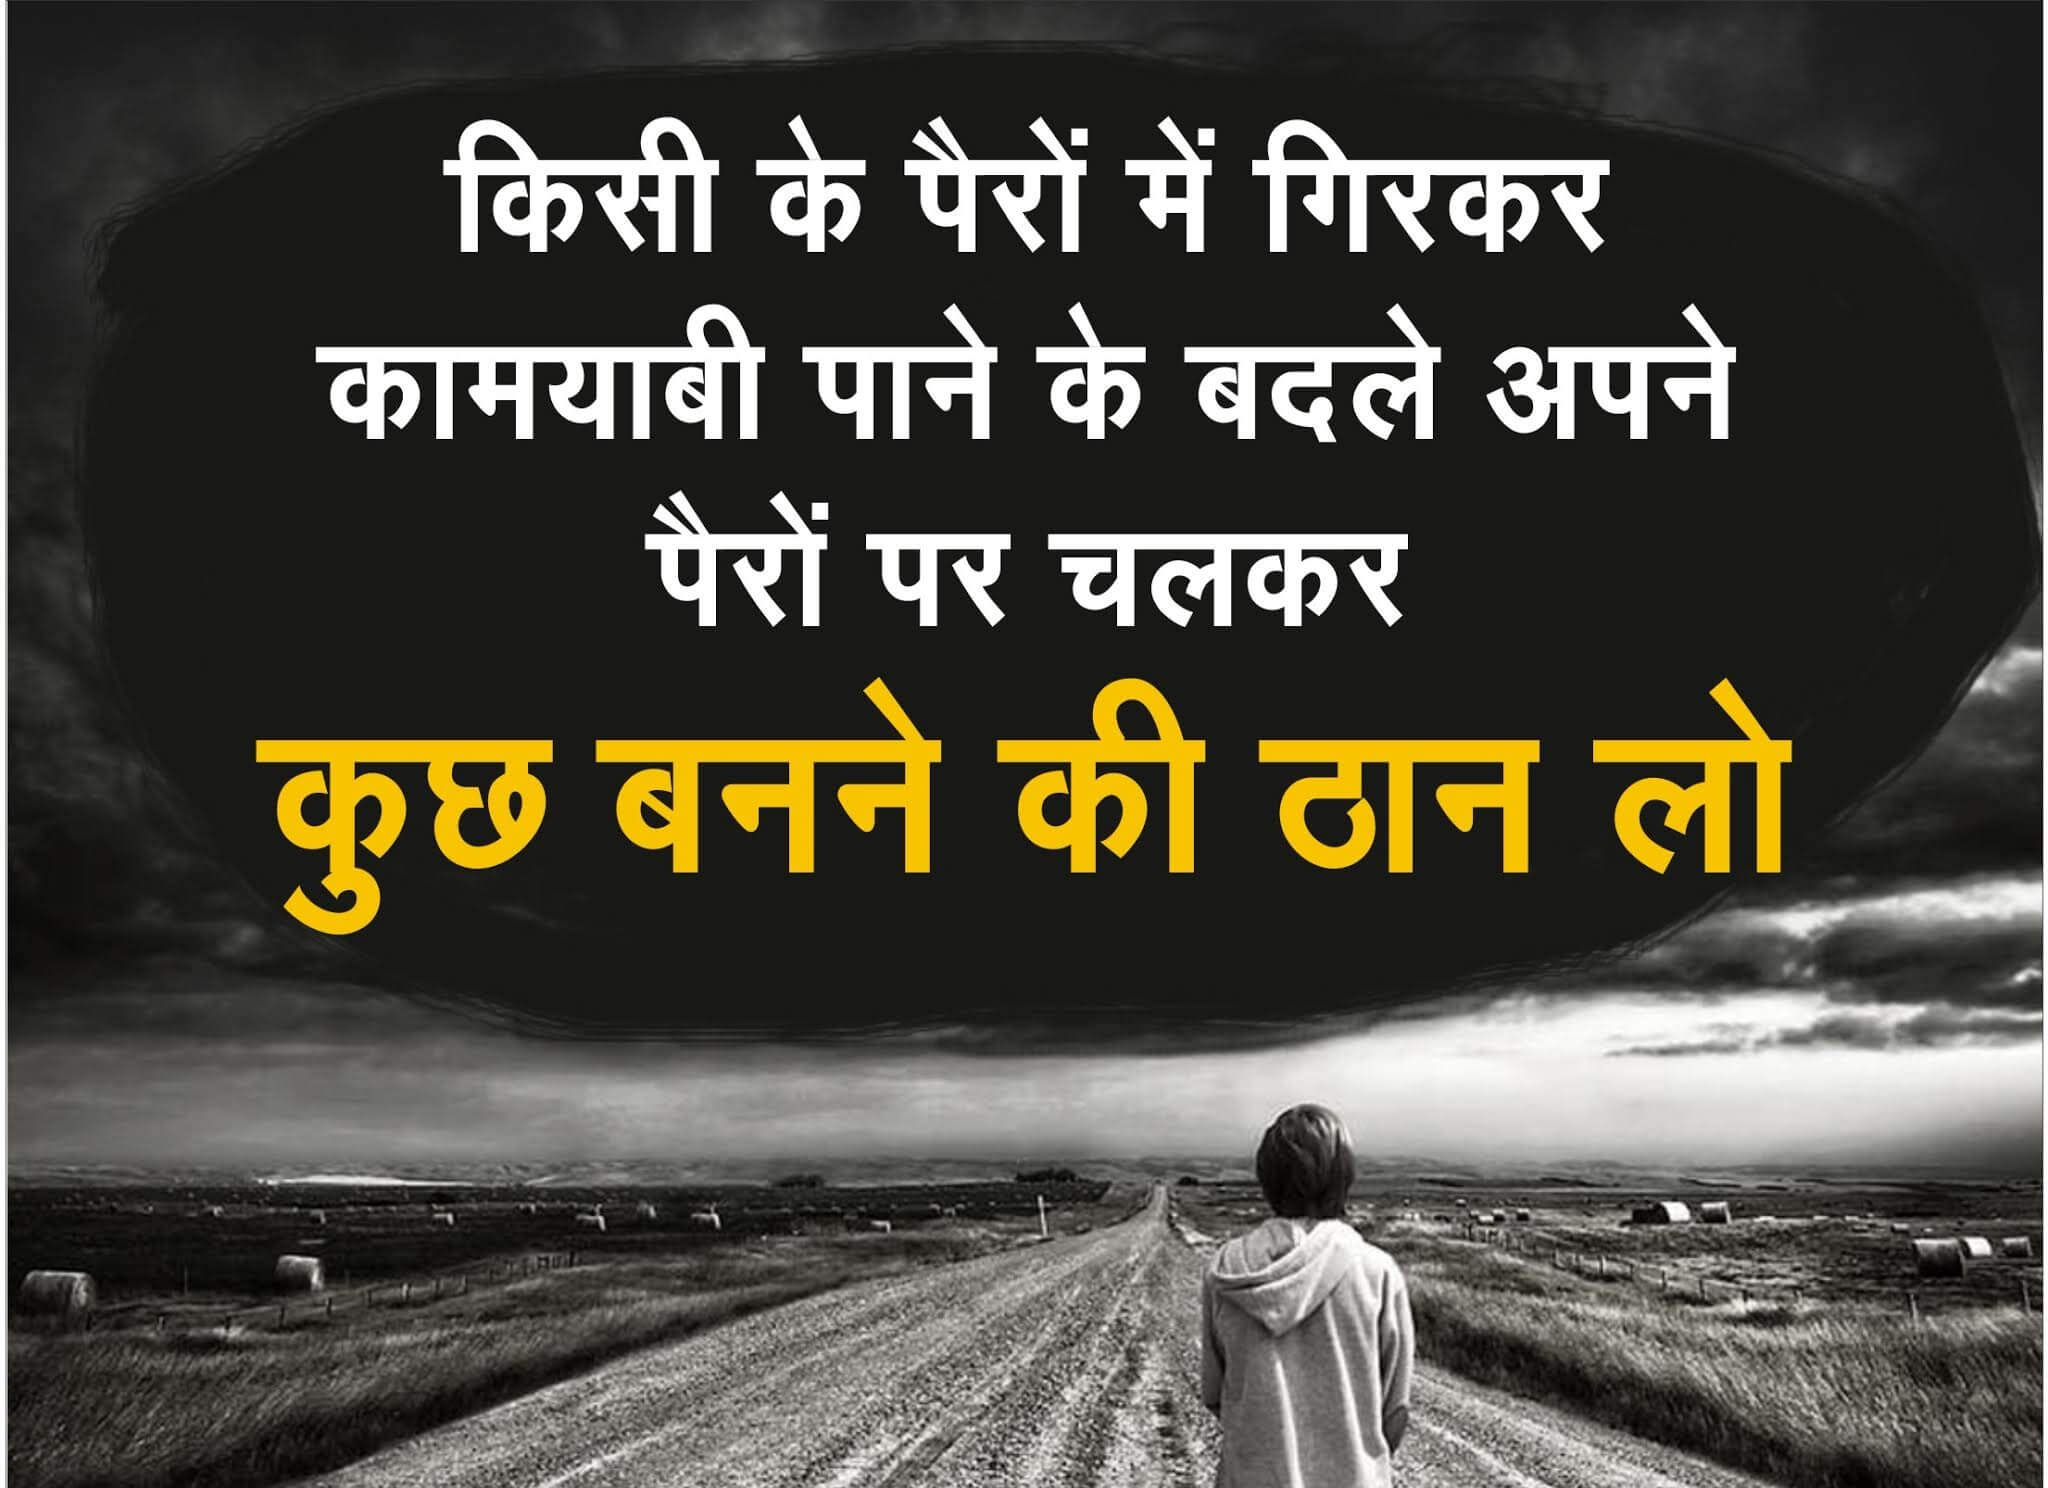 Hindi Motivational Quotes and Thoughts | हिन्दी मोटिवेशनल क्वोट्स और विचार